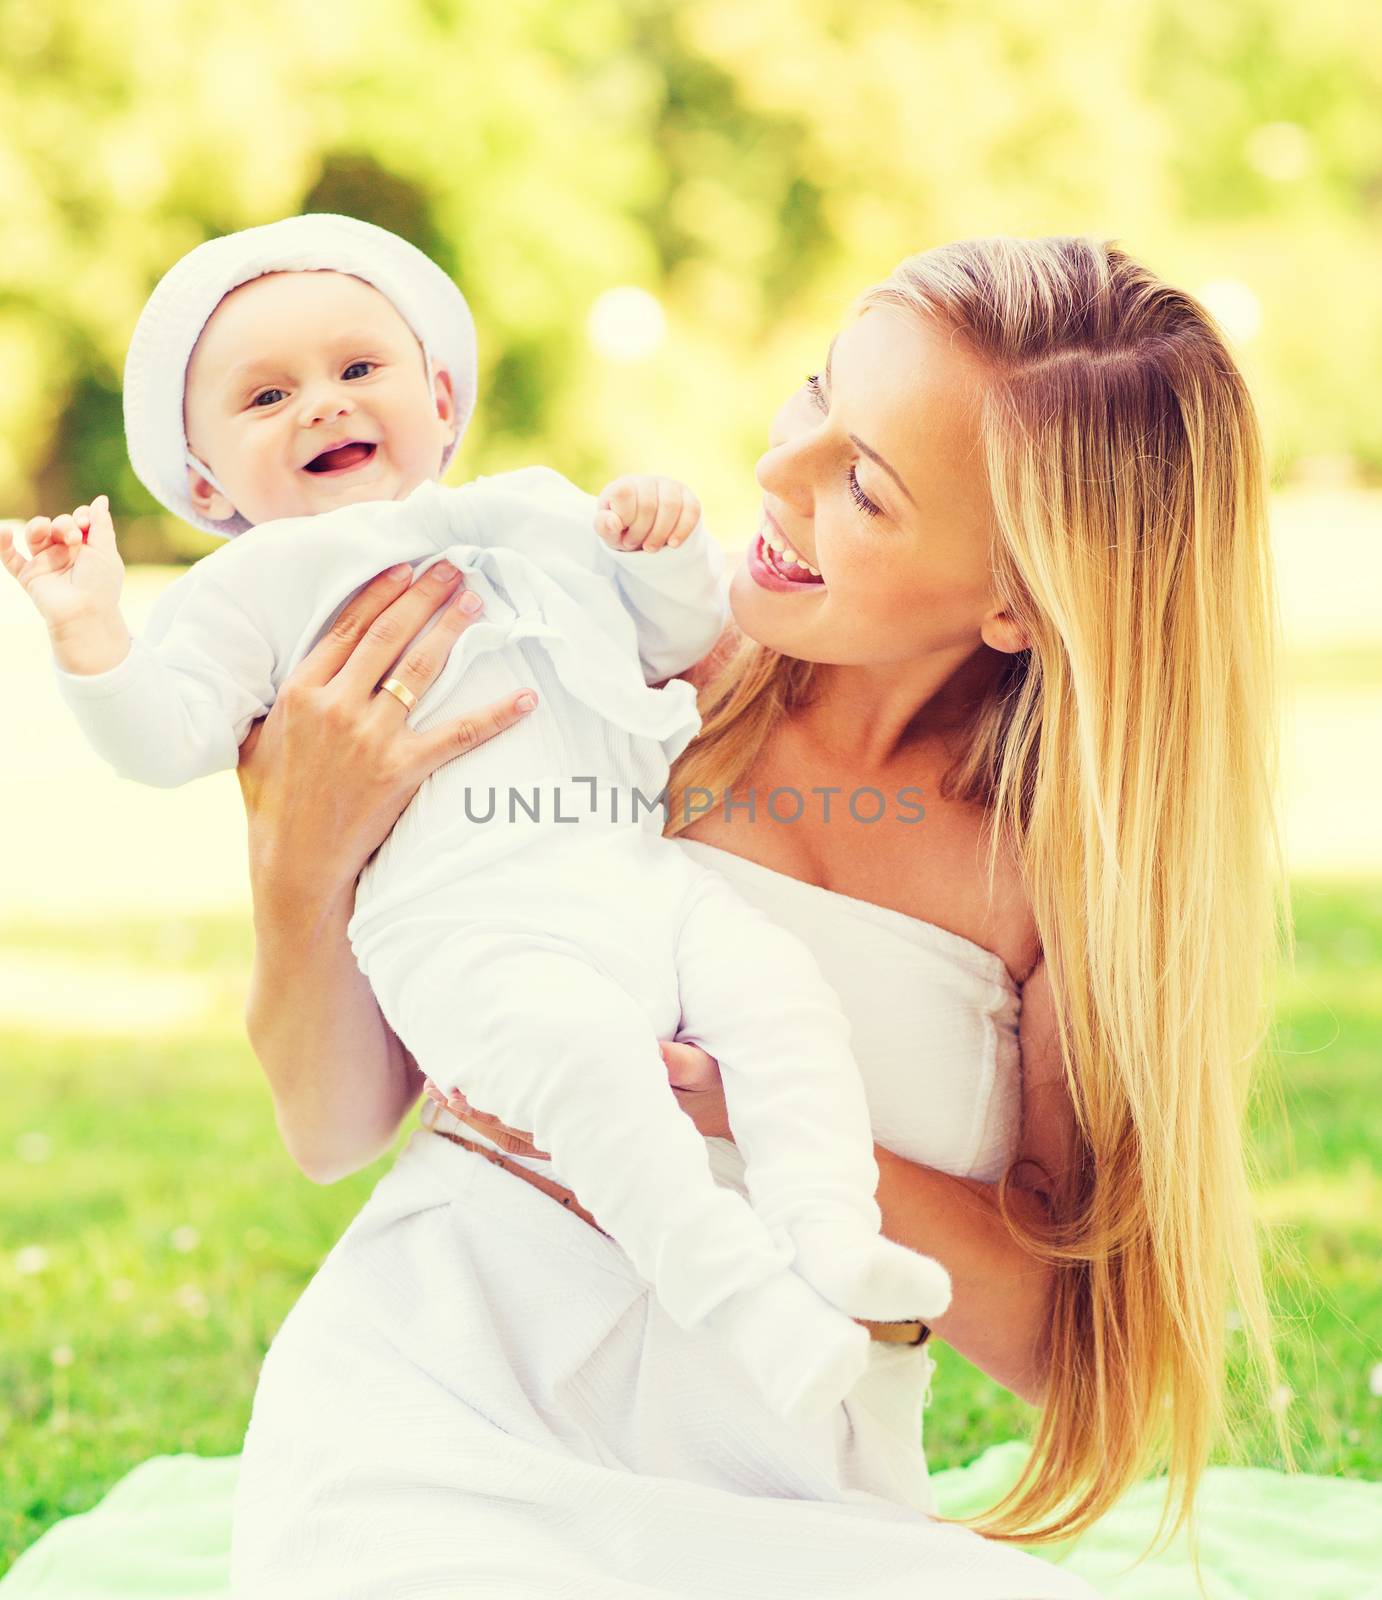 family, child and parenthood concept - happy mother with little baby sitting on blanket in park